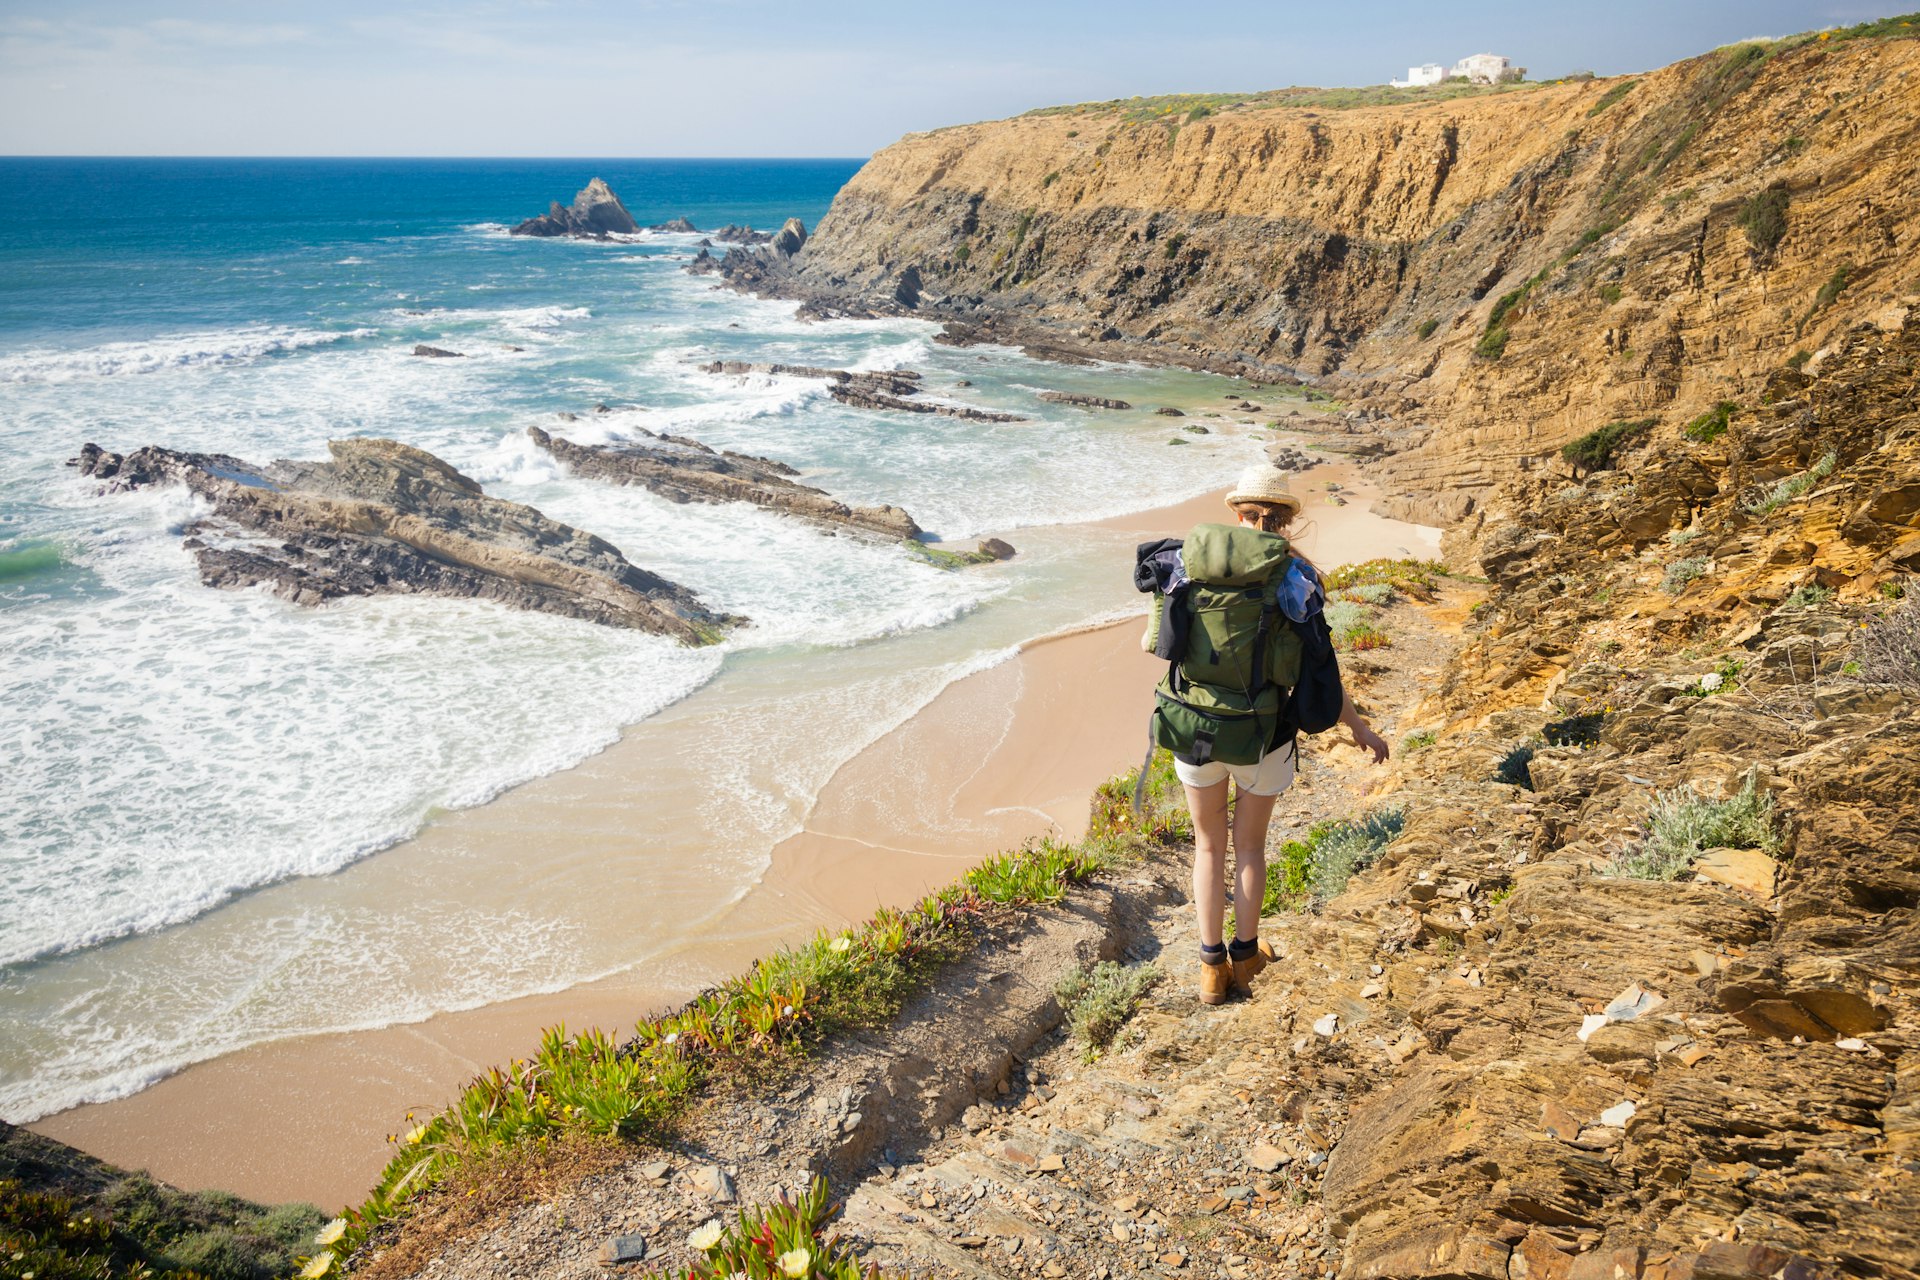 A female hiker with a large rucksack makes her way along the Rota Vicentina hiking trail in Portugal. Ahead of her is a wide sandy beach, which is being lapped by a calm sea.